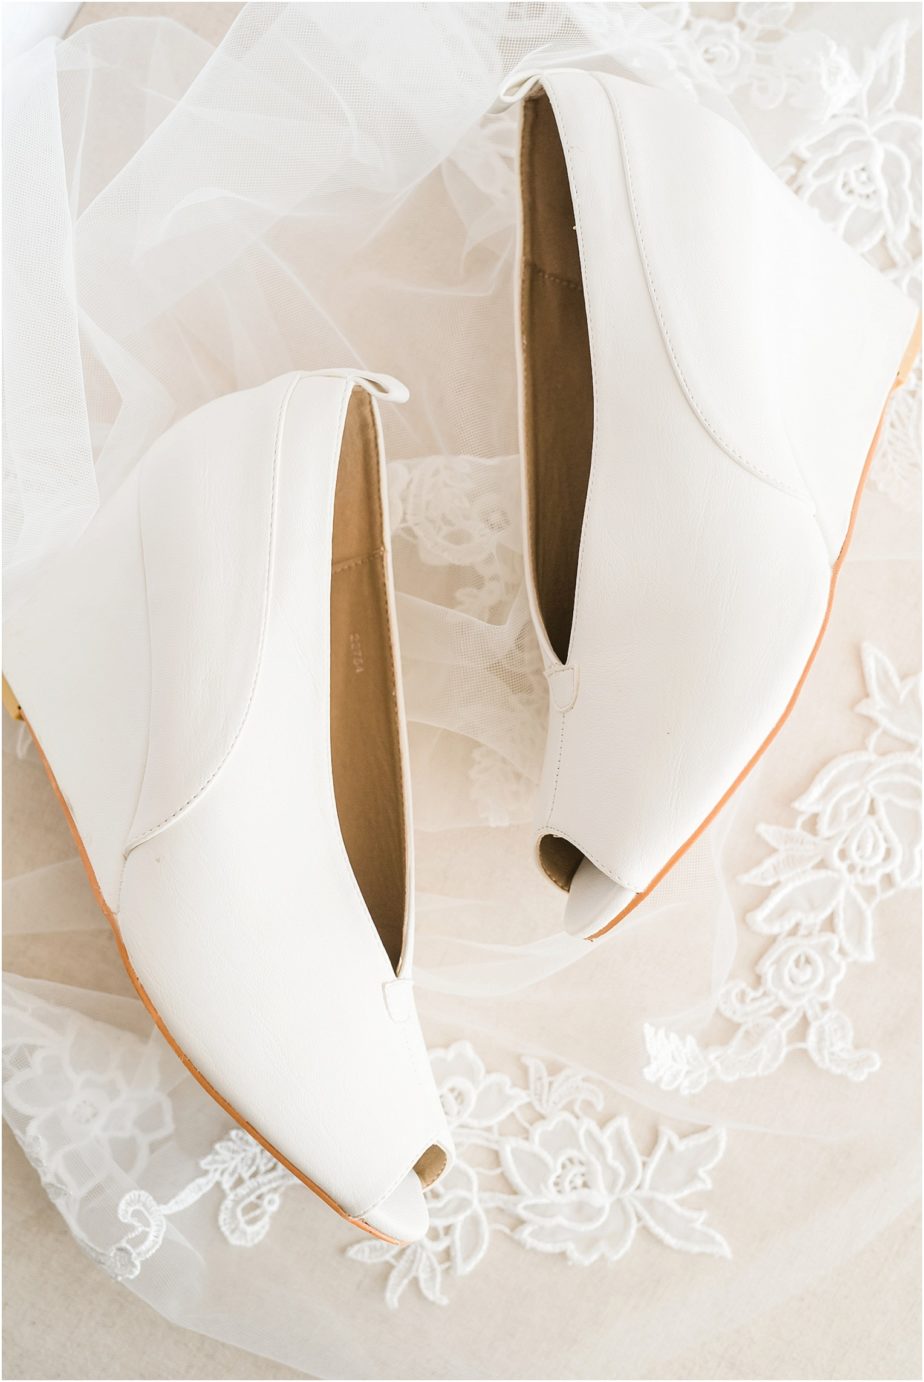 Kiana Lodge Wedding Seattle Photographer Connie and Nate brides shoes